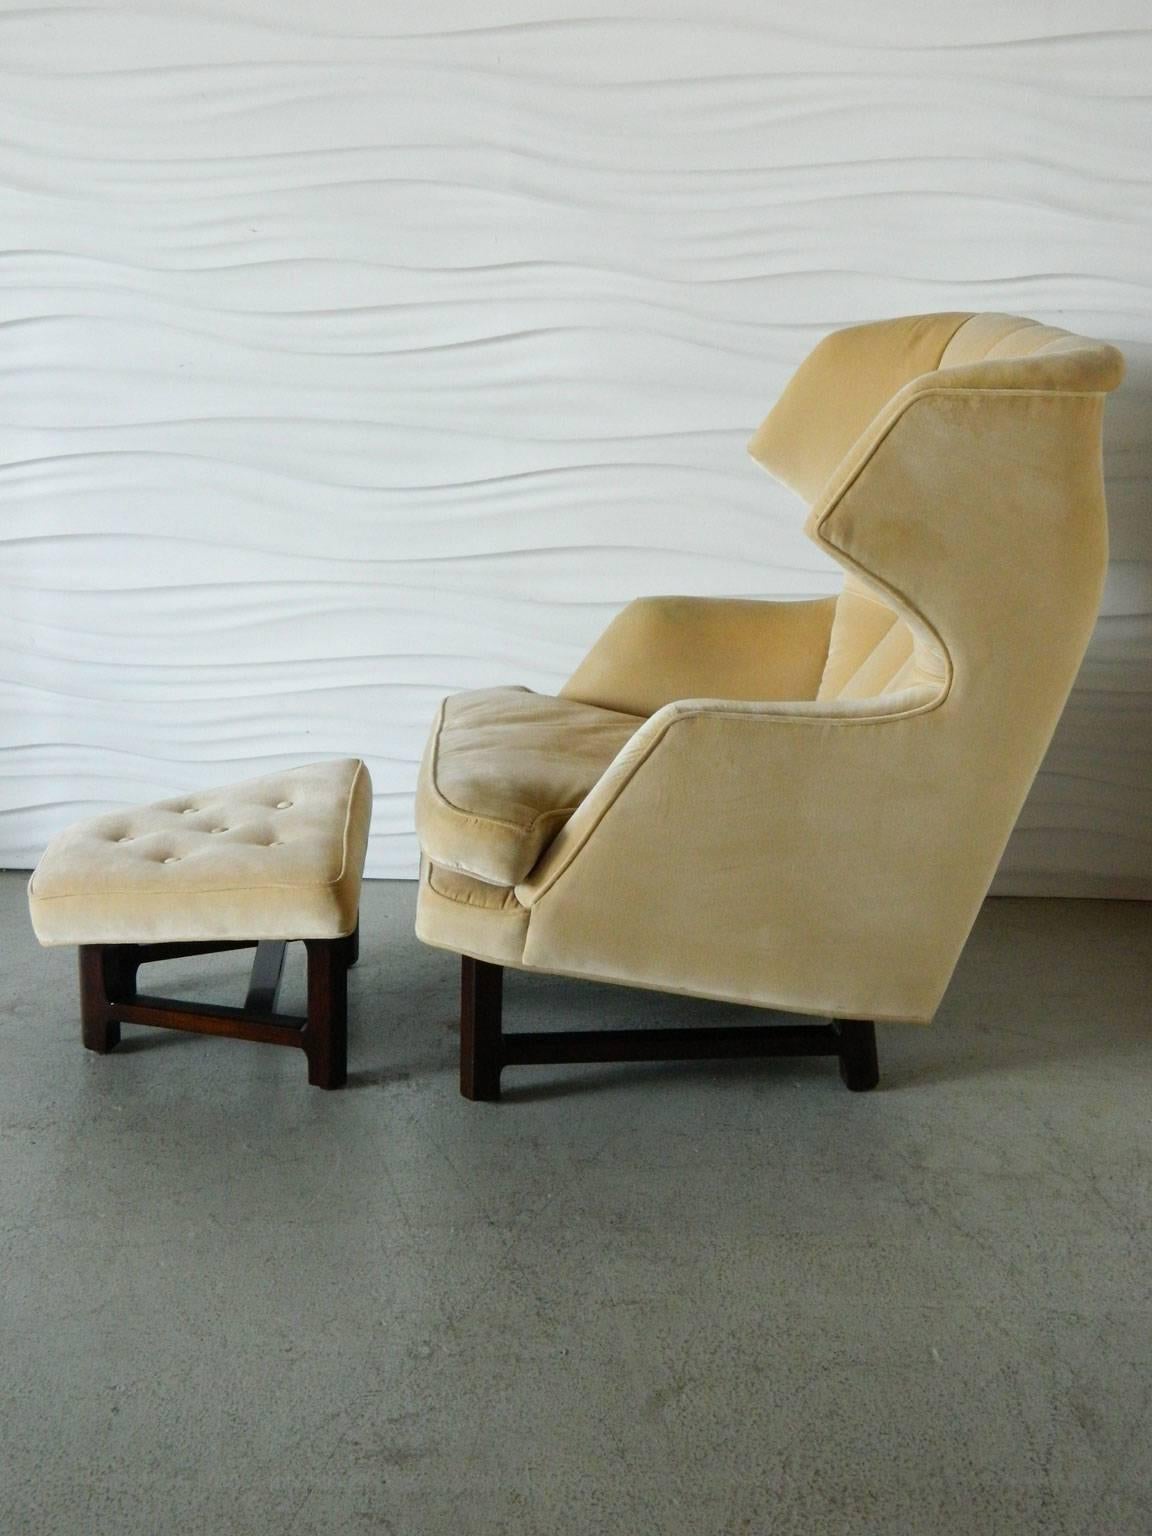 20th Century Janus Wing Chair and Ottoman by Edward Wormley for Dunbar